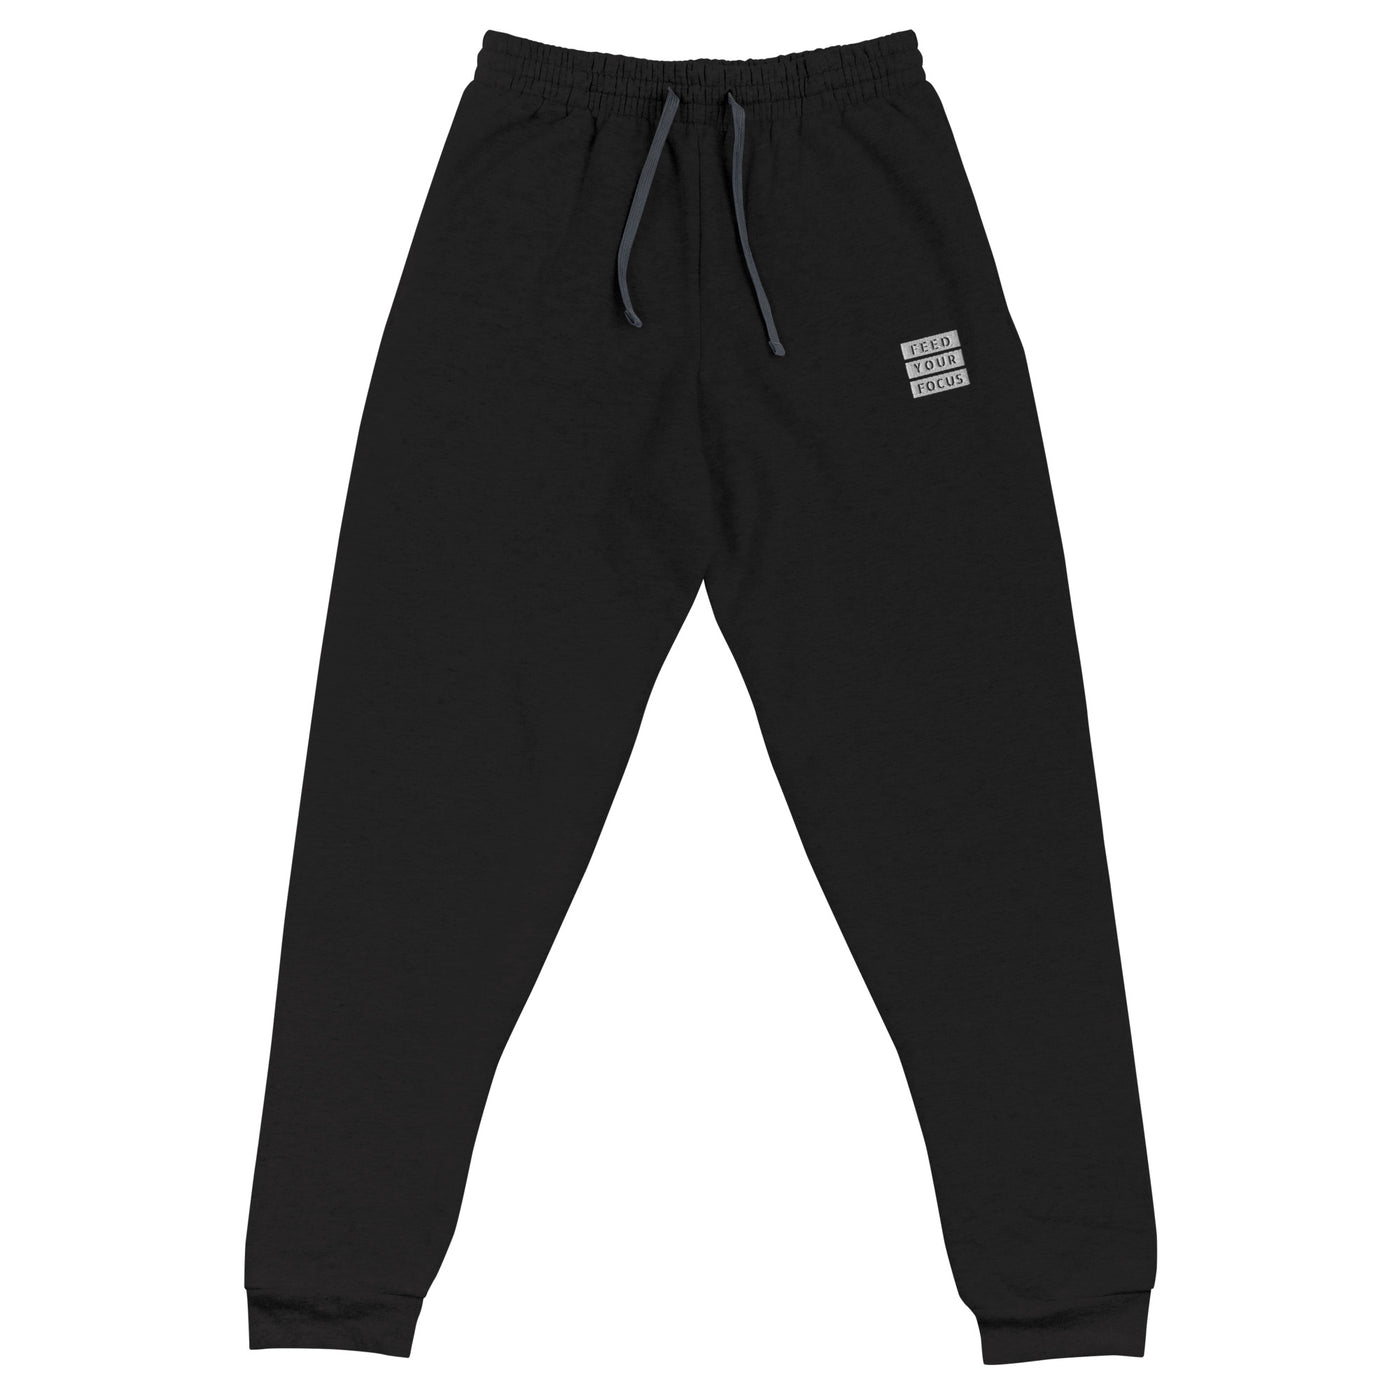 Women's Black Embroidered Joggers - Feed Your Focus